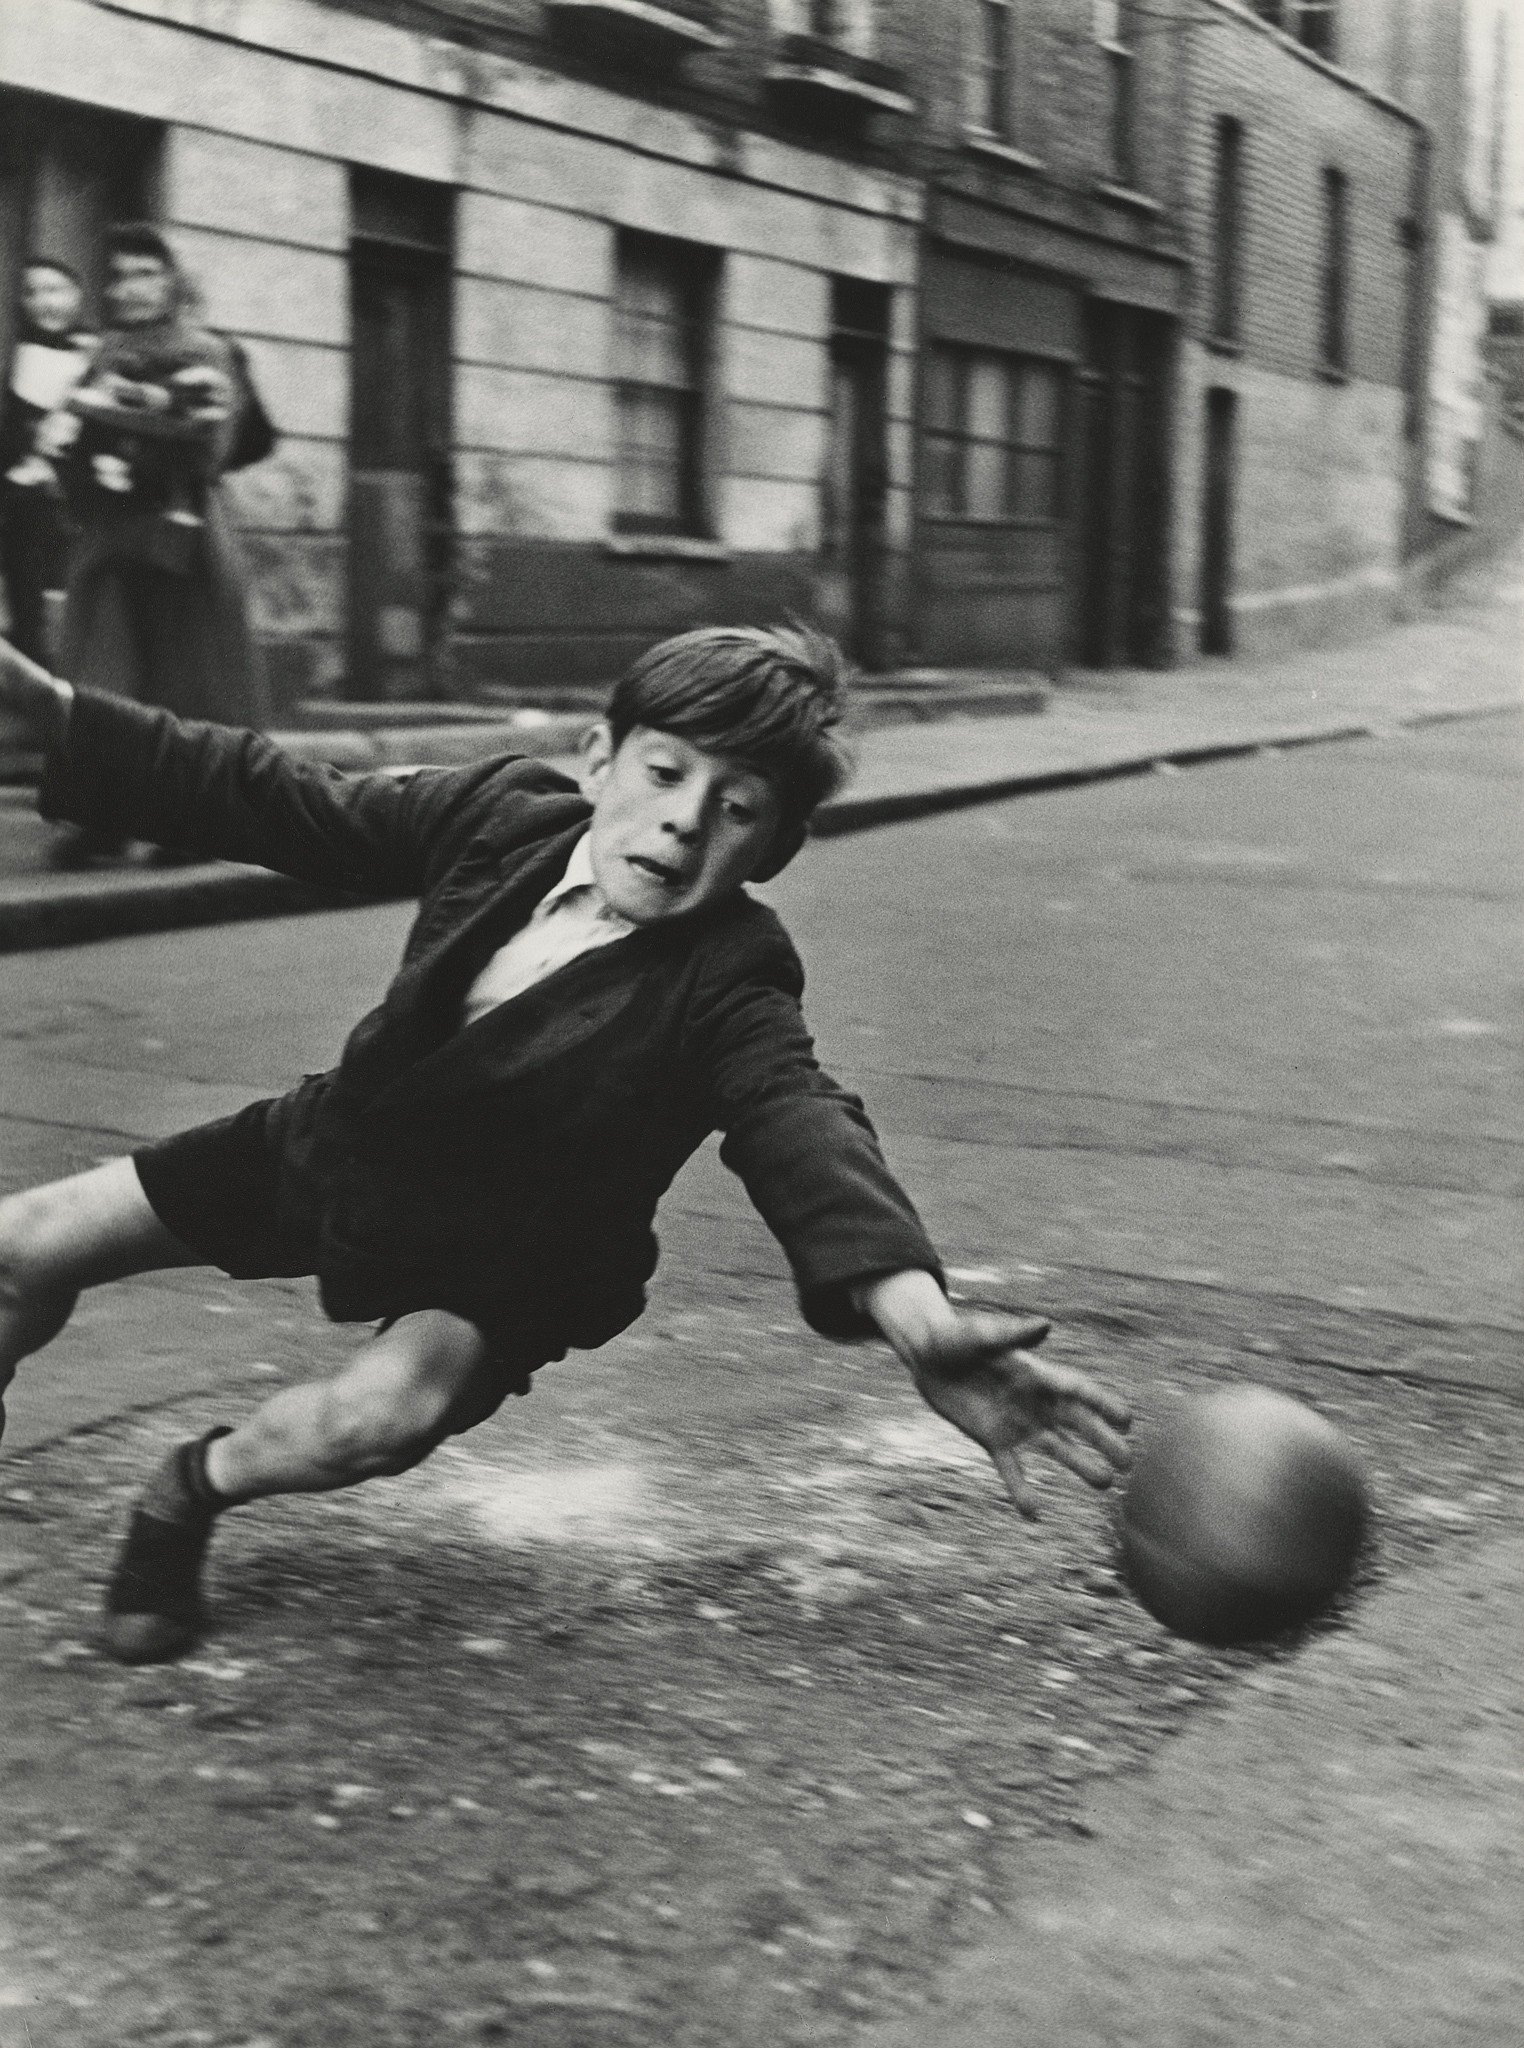 PRESS RELEASE: Roger Mayne: What he saved for his family, Jan 17 - Mar 25, 2023